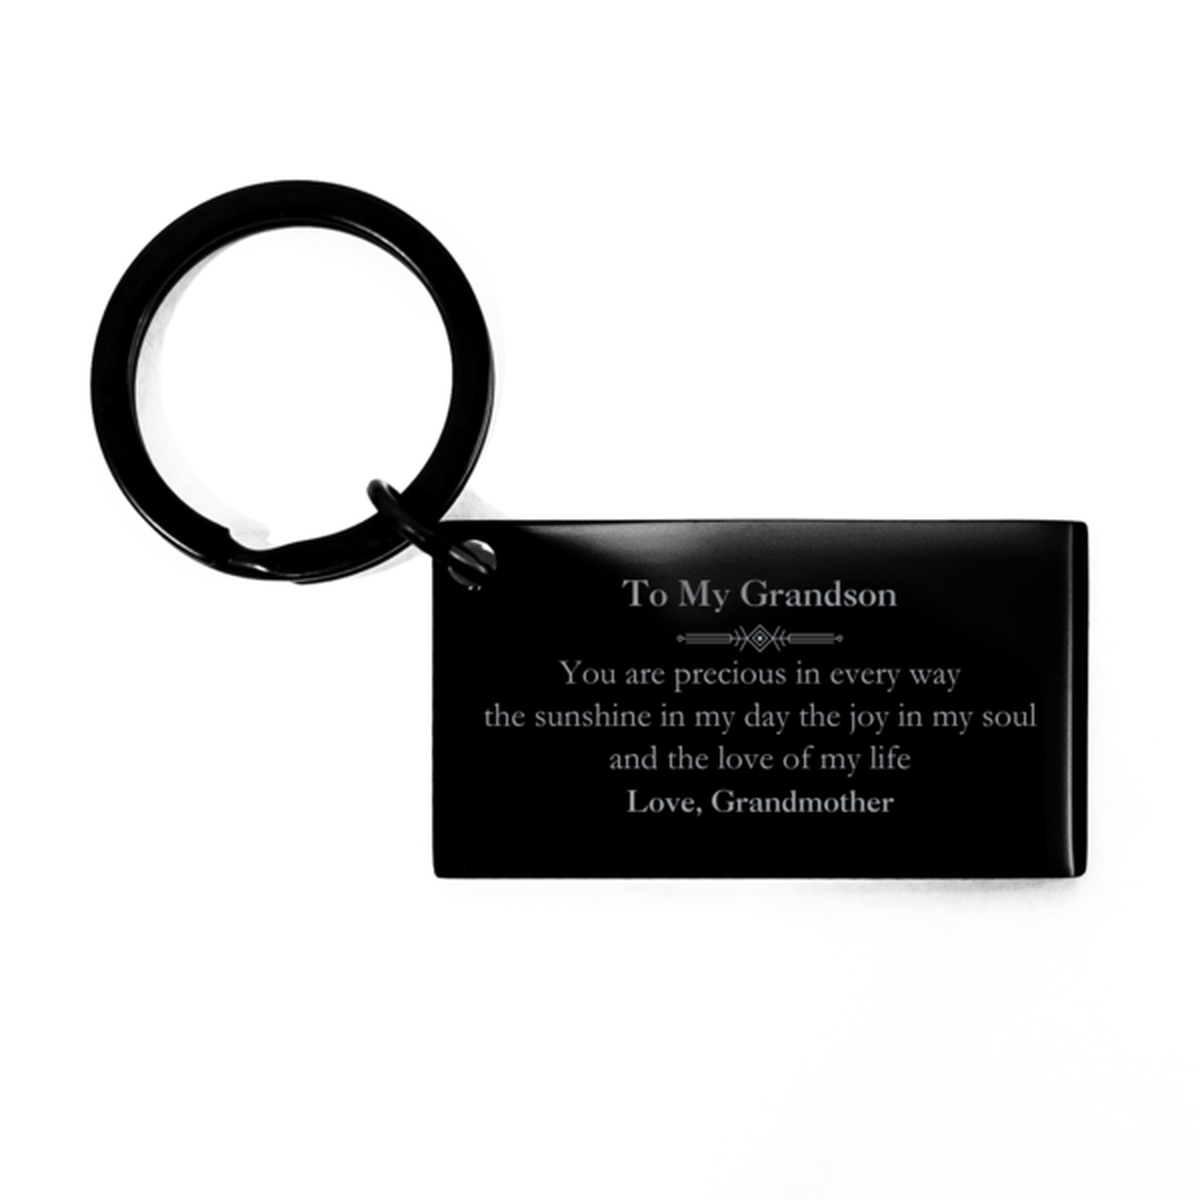 Graduation Gifts for Grandson Keychain Present from Grandmother, Christmas Grandson Birthday Gifts Grandson You are precious in every way the sunshine in my day. Love, Grandmother